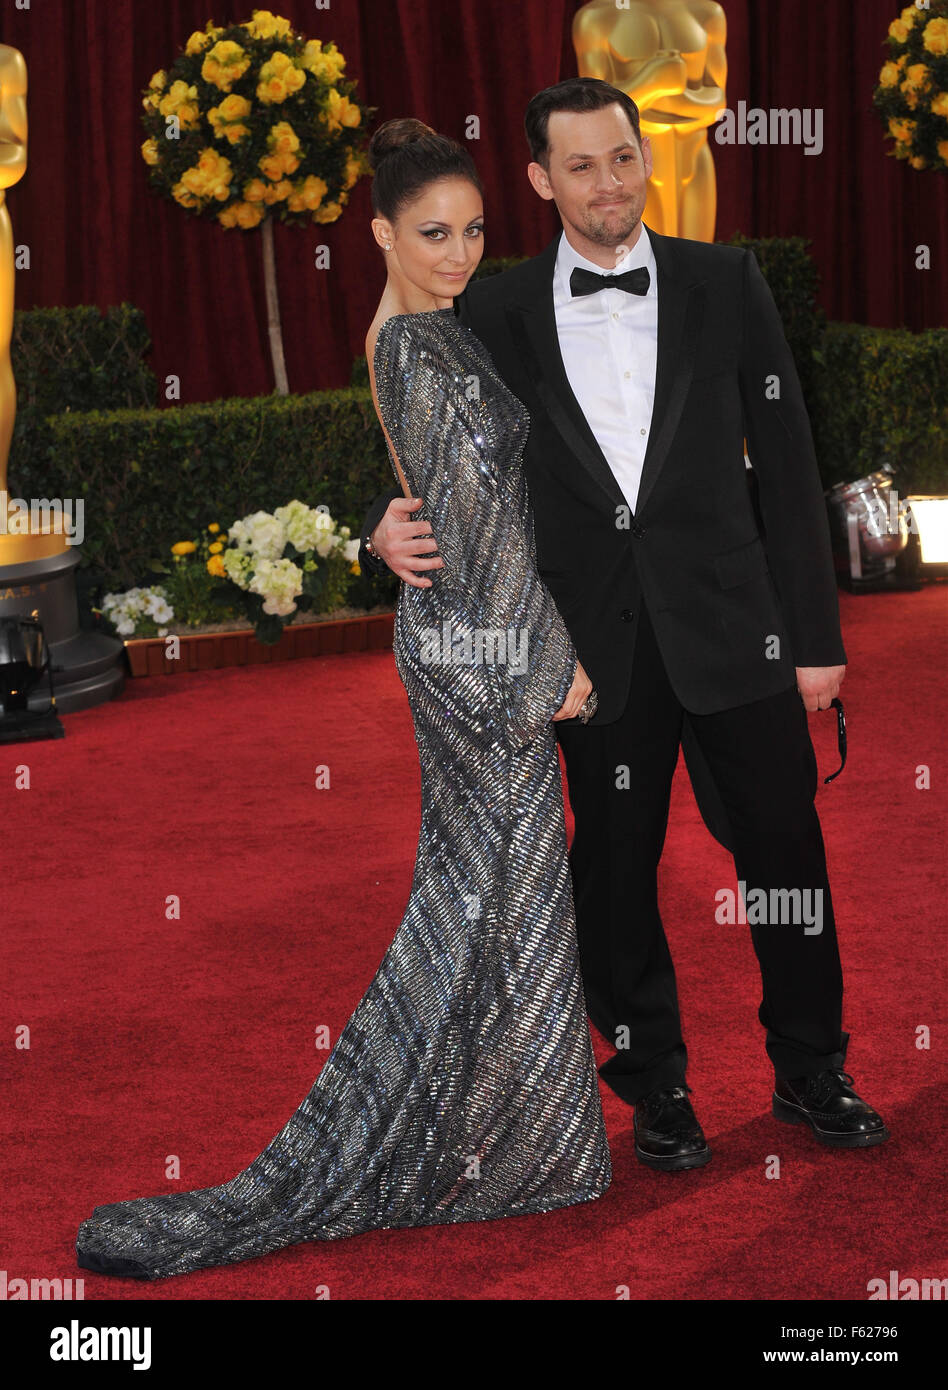 LOS ANGELES, CA - MARCH 7, 2010: Nicole Ritchie & Joel Madden at the 82nd Annual Academy Awards at the Kodak Theatre, Hollywood. Stock Photo